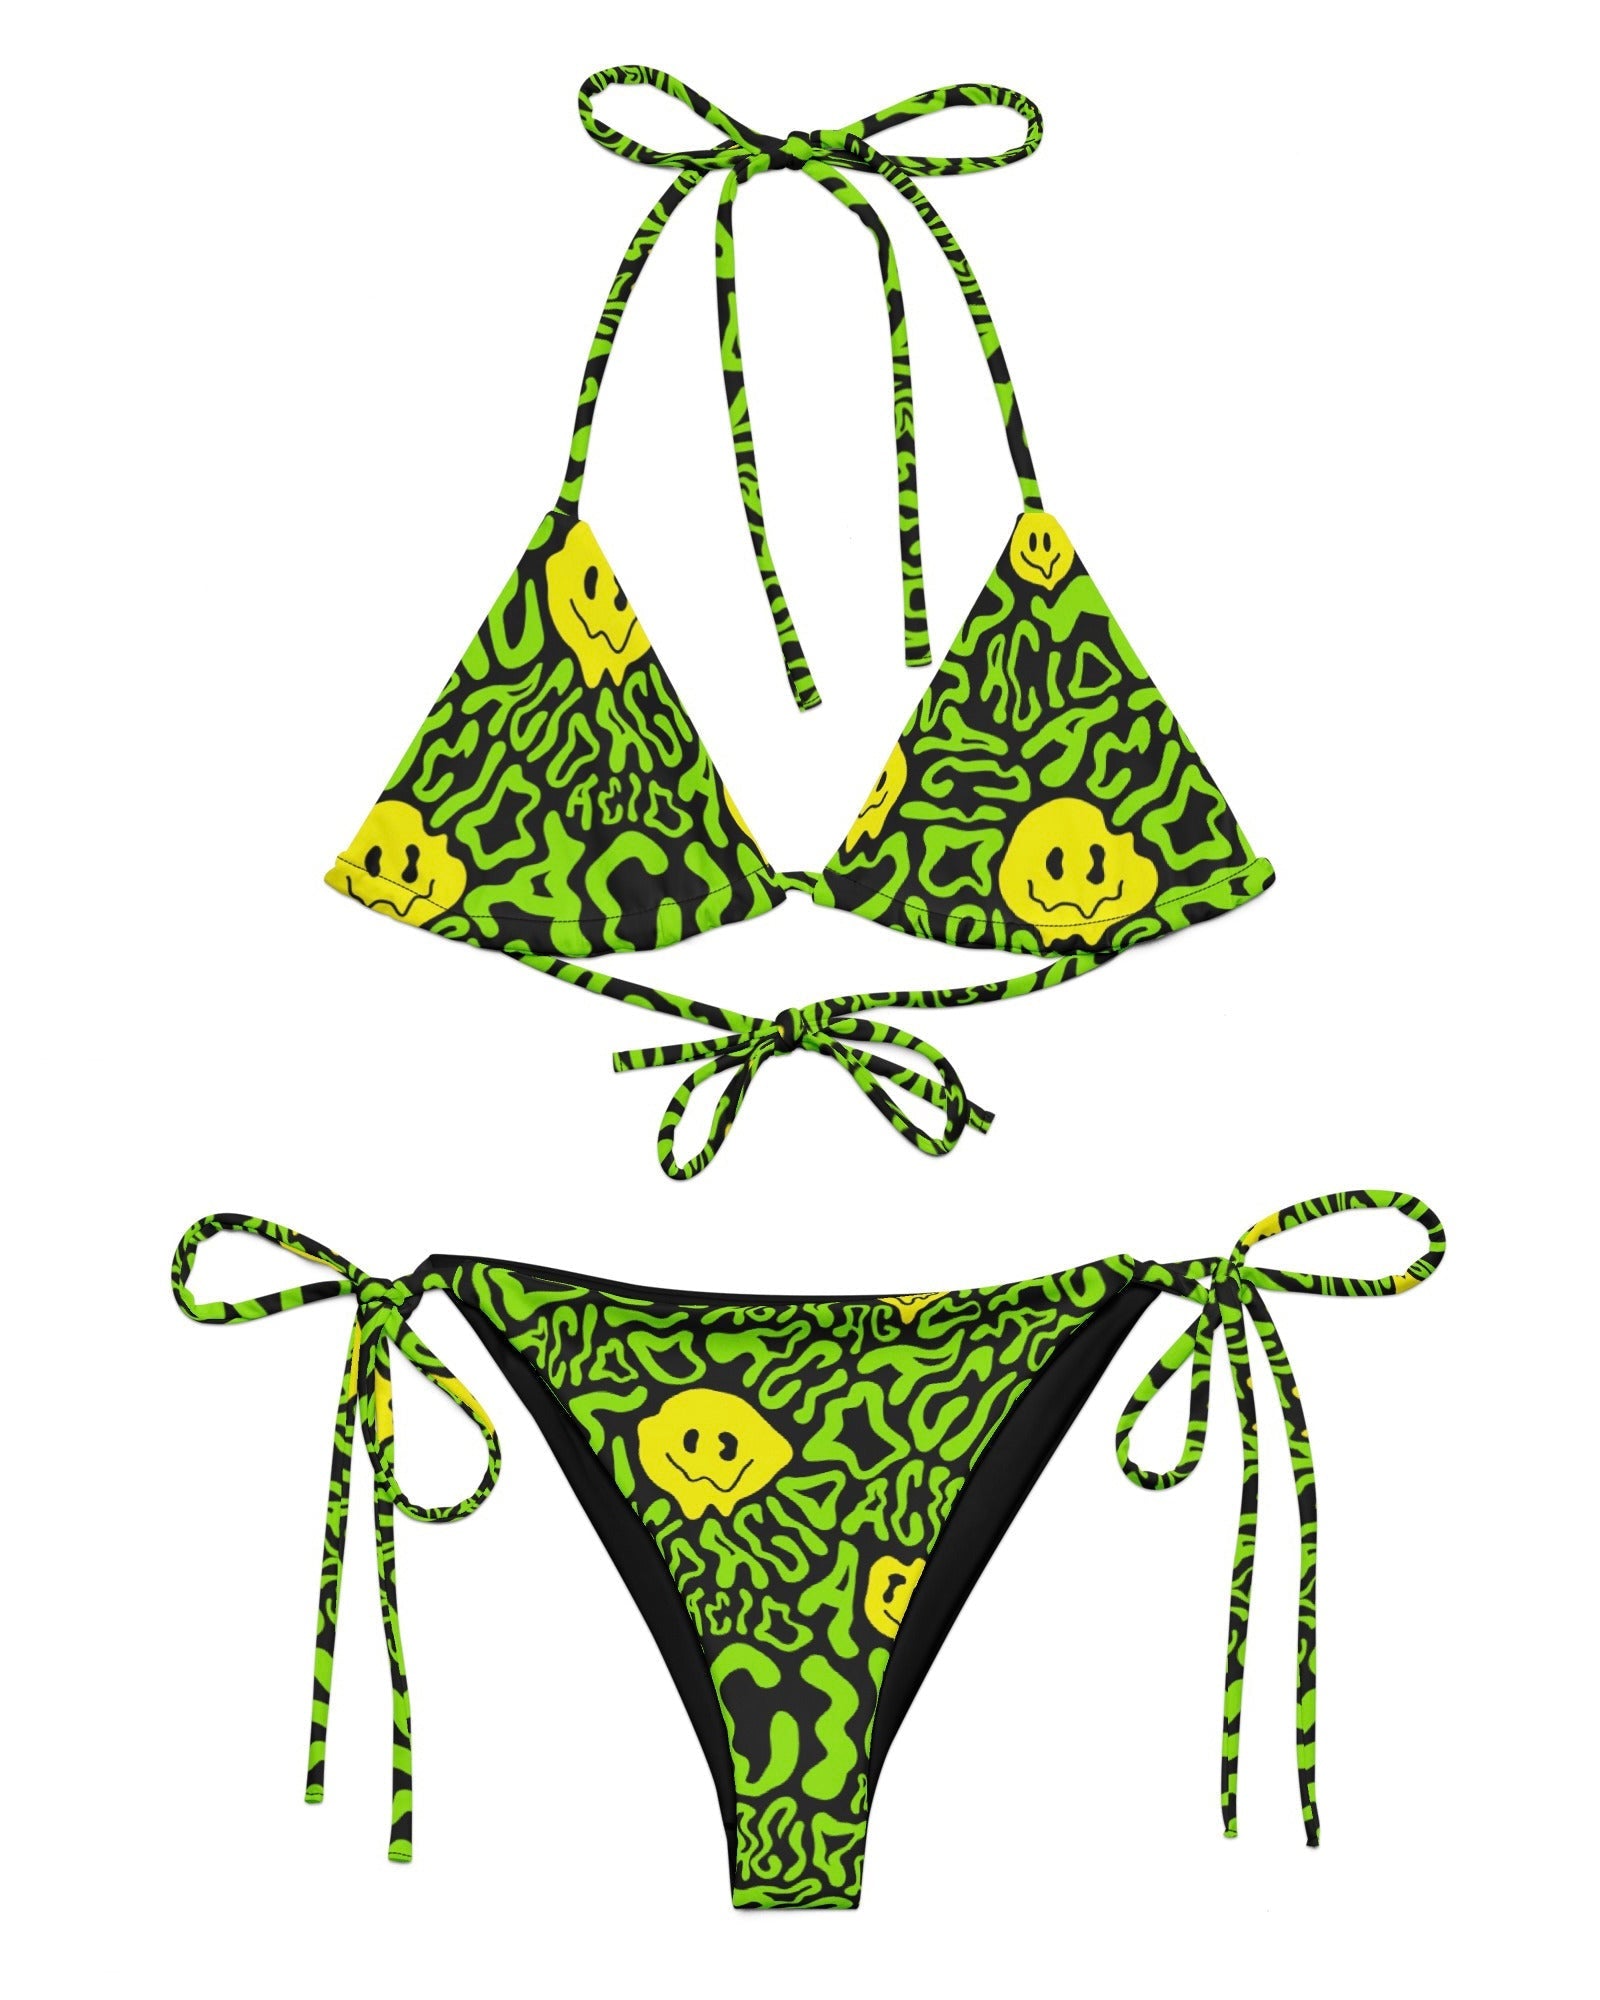 The Acid Smilez Triangle Top & Acid Smilez String Bottoms by One Stop Rave on a white background.